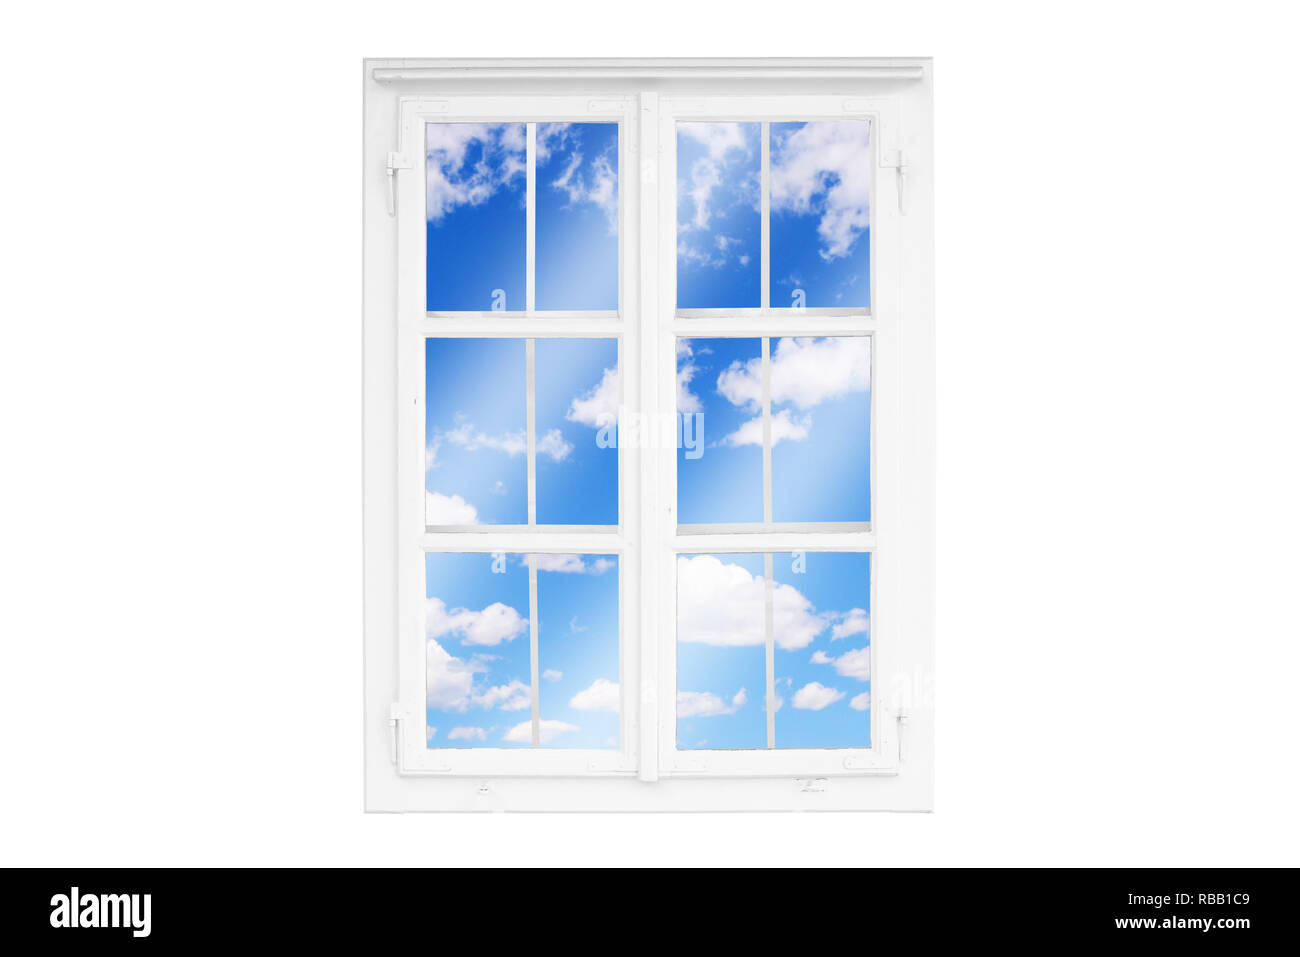 View through the window to white clouds, sky. Concept of relaxation, good mood. Isolated frame. Stock Photo